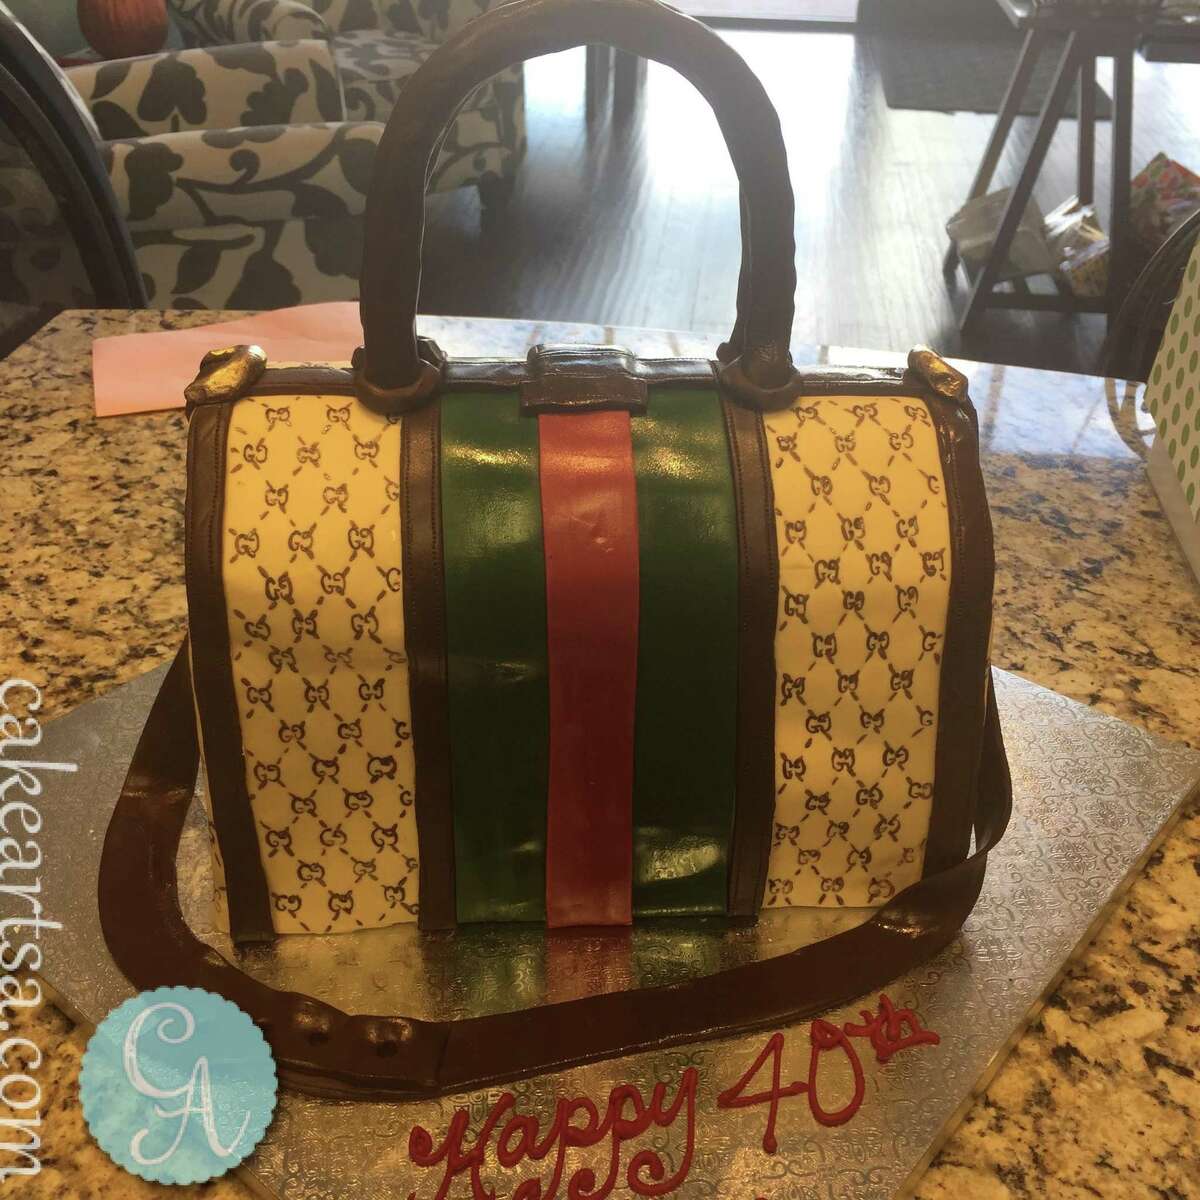 Cake art is all the rage, and it’s inspired legions of #nailedit #cakefails